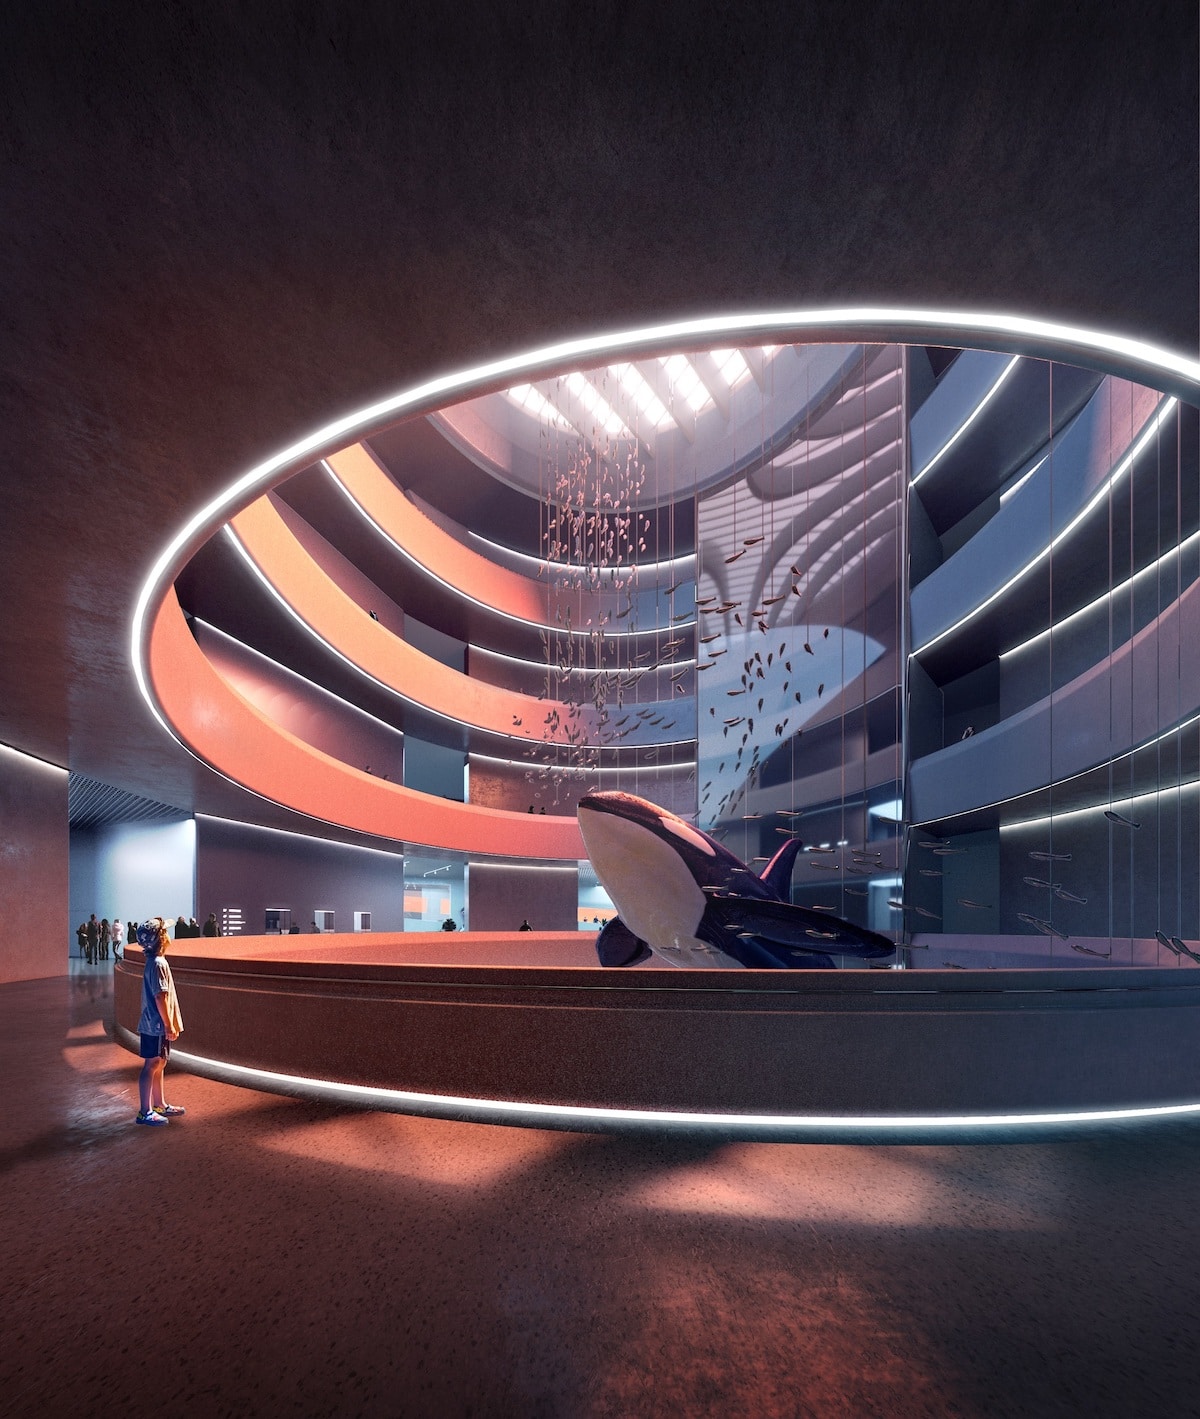 Interior Atrium View of Hainan Science and Technology Museum by MAD Architects